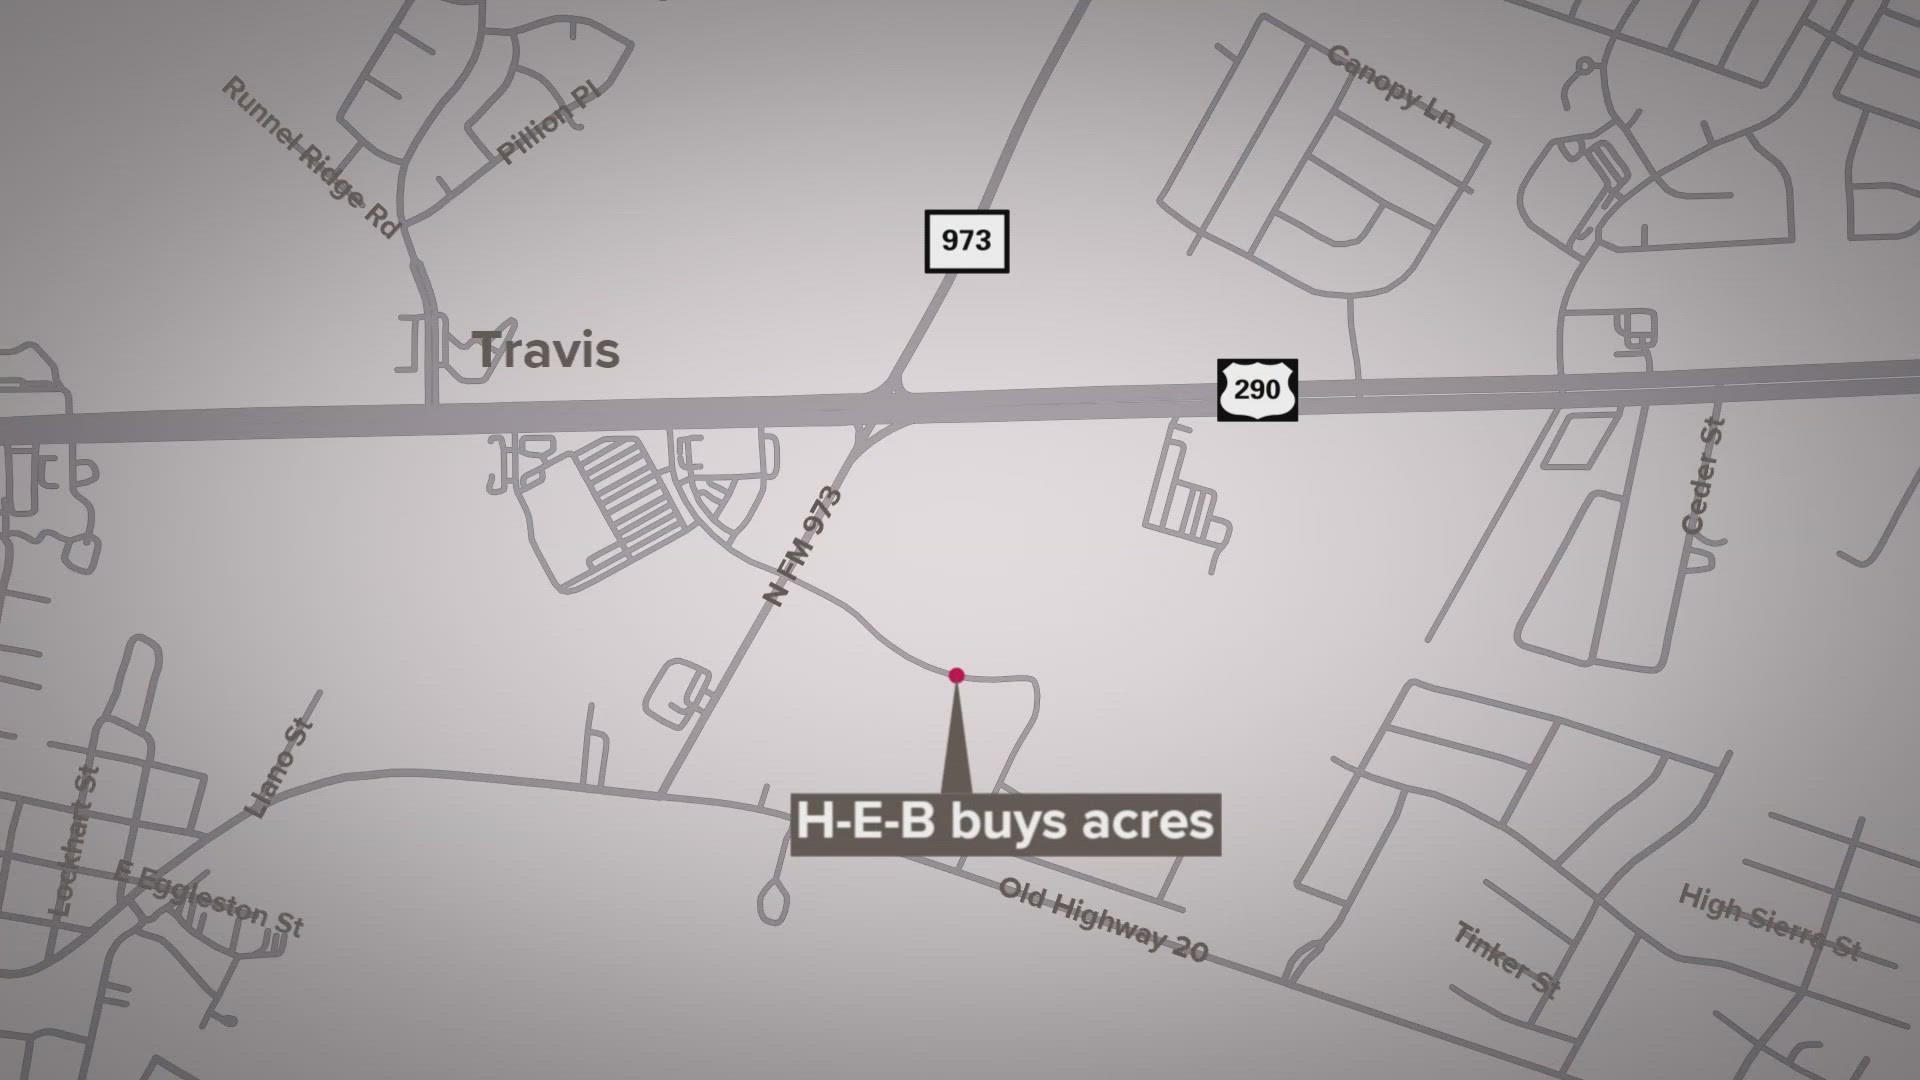 A recent Travis County deed filing shows evidence of a potential new H-E-B location in Manor.